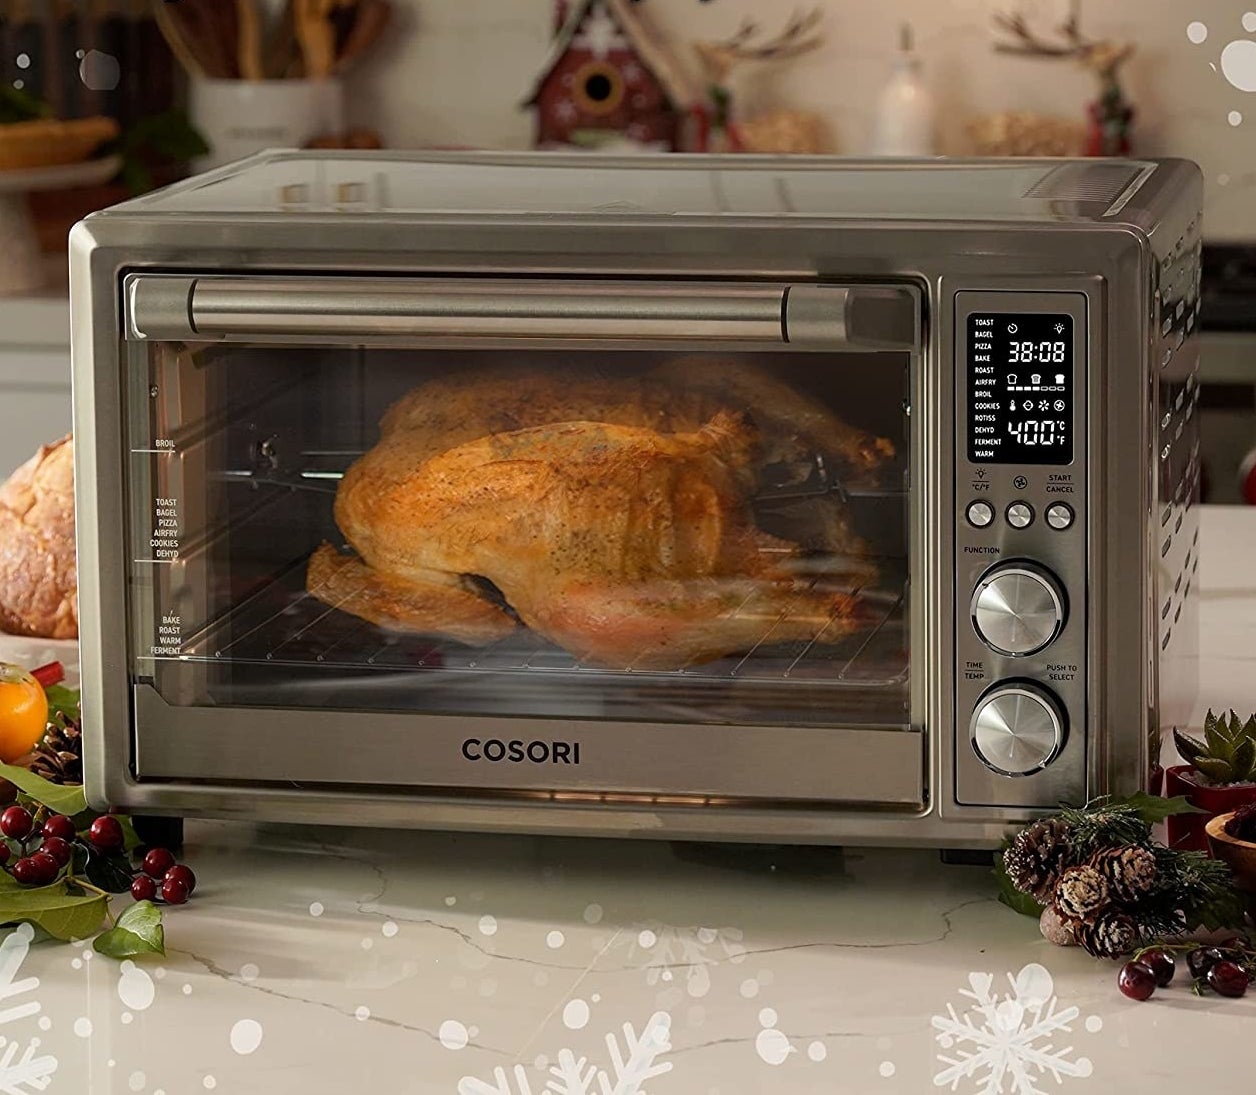 A rotisserie chicken inside the oven